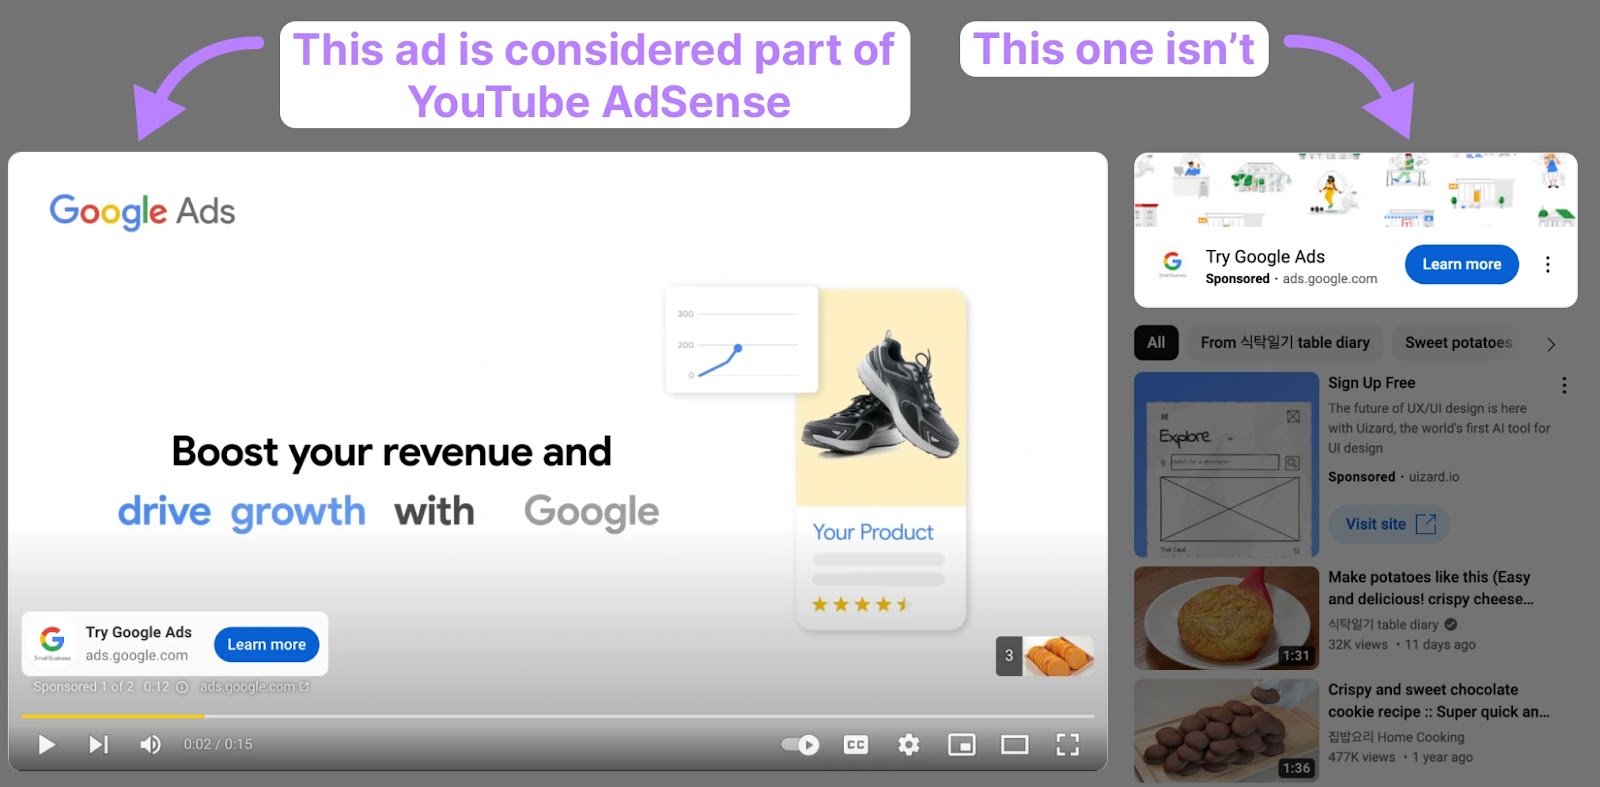 An example of a video considered part of YouTube AdSense, and the one that isn't